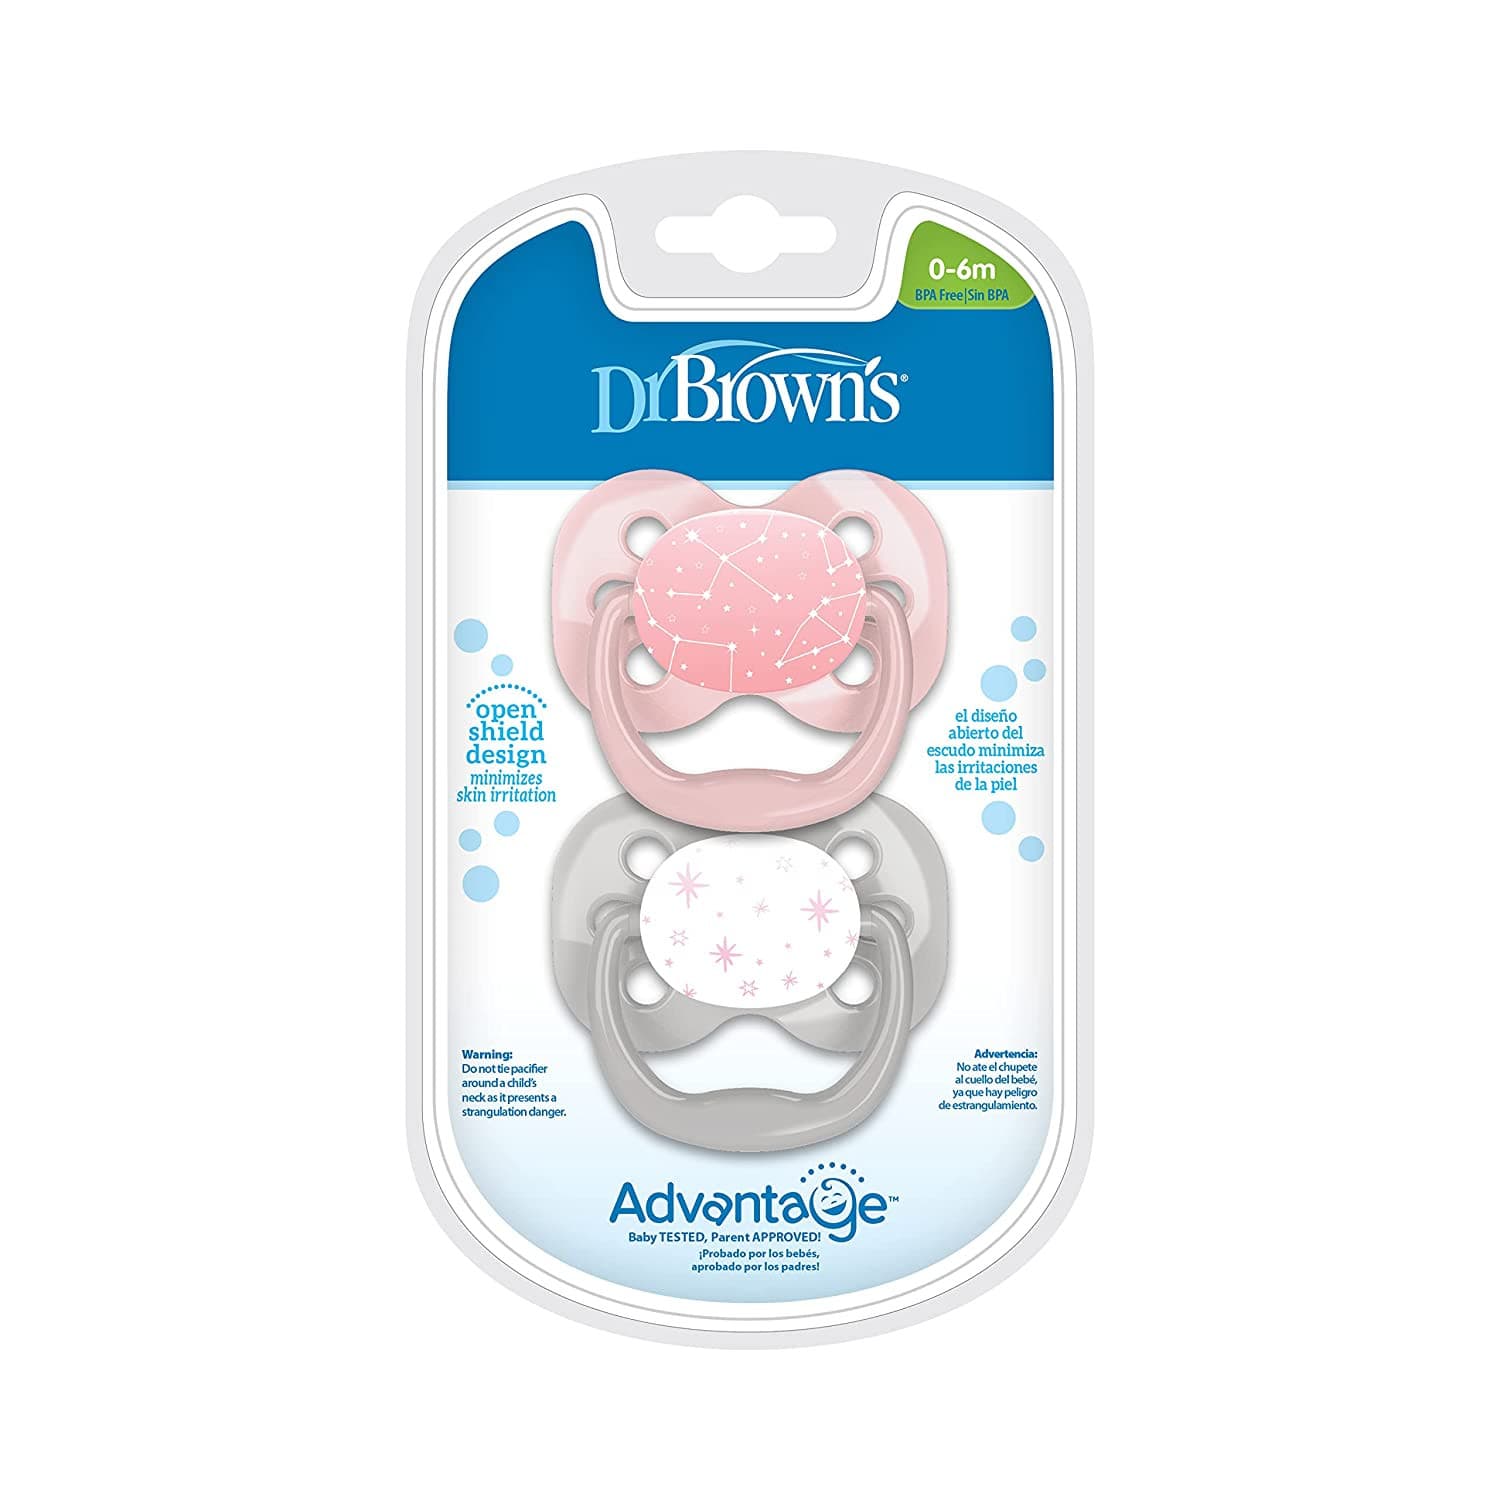 Dr. Brown's Advantage Pacifier Stage 1, 2-Pack, 0-6m.